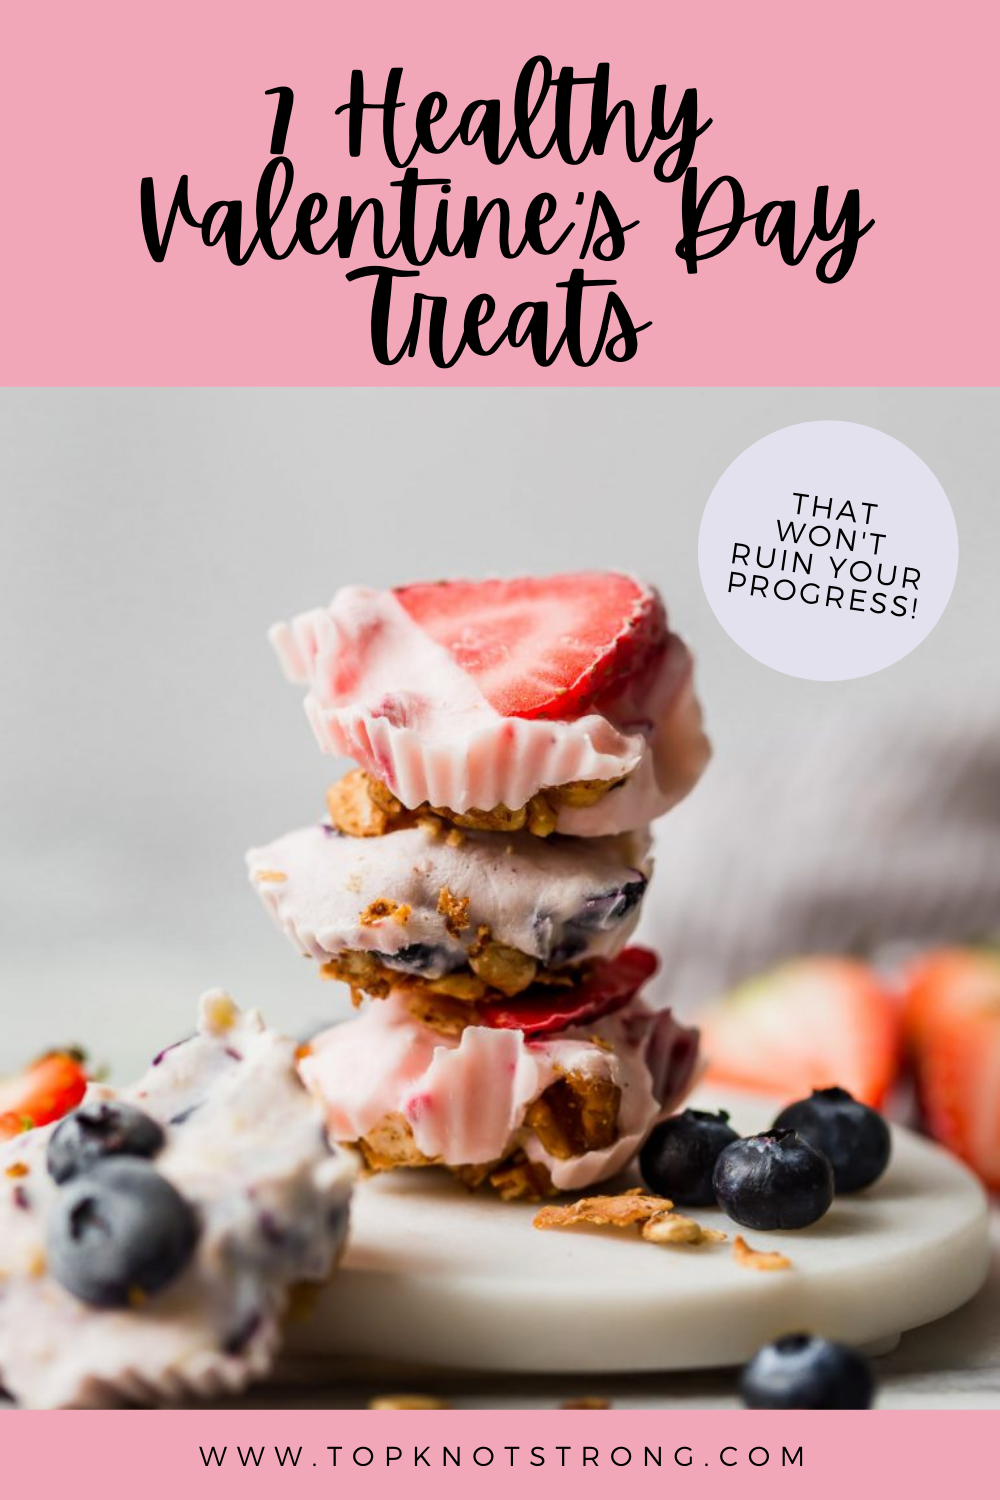 7 Sweet and Healthy Valentine's Day Treats